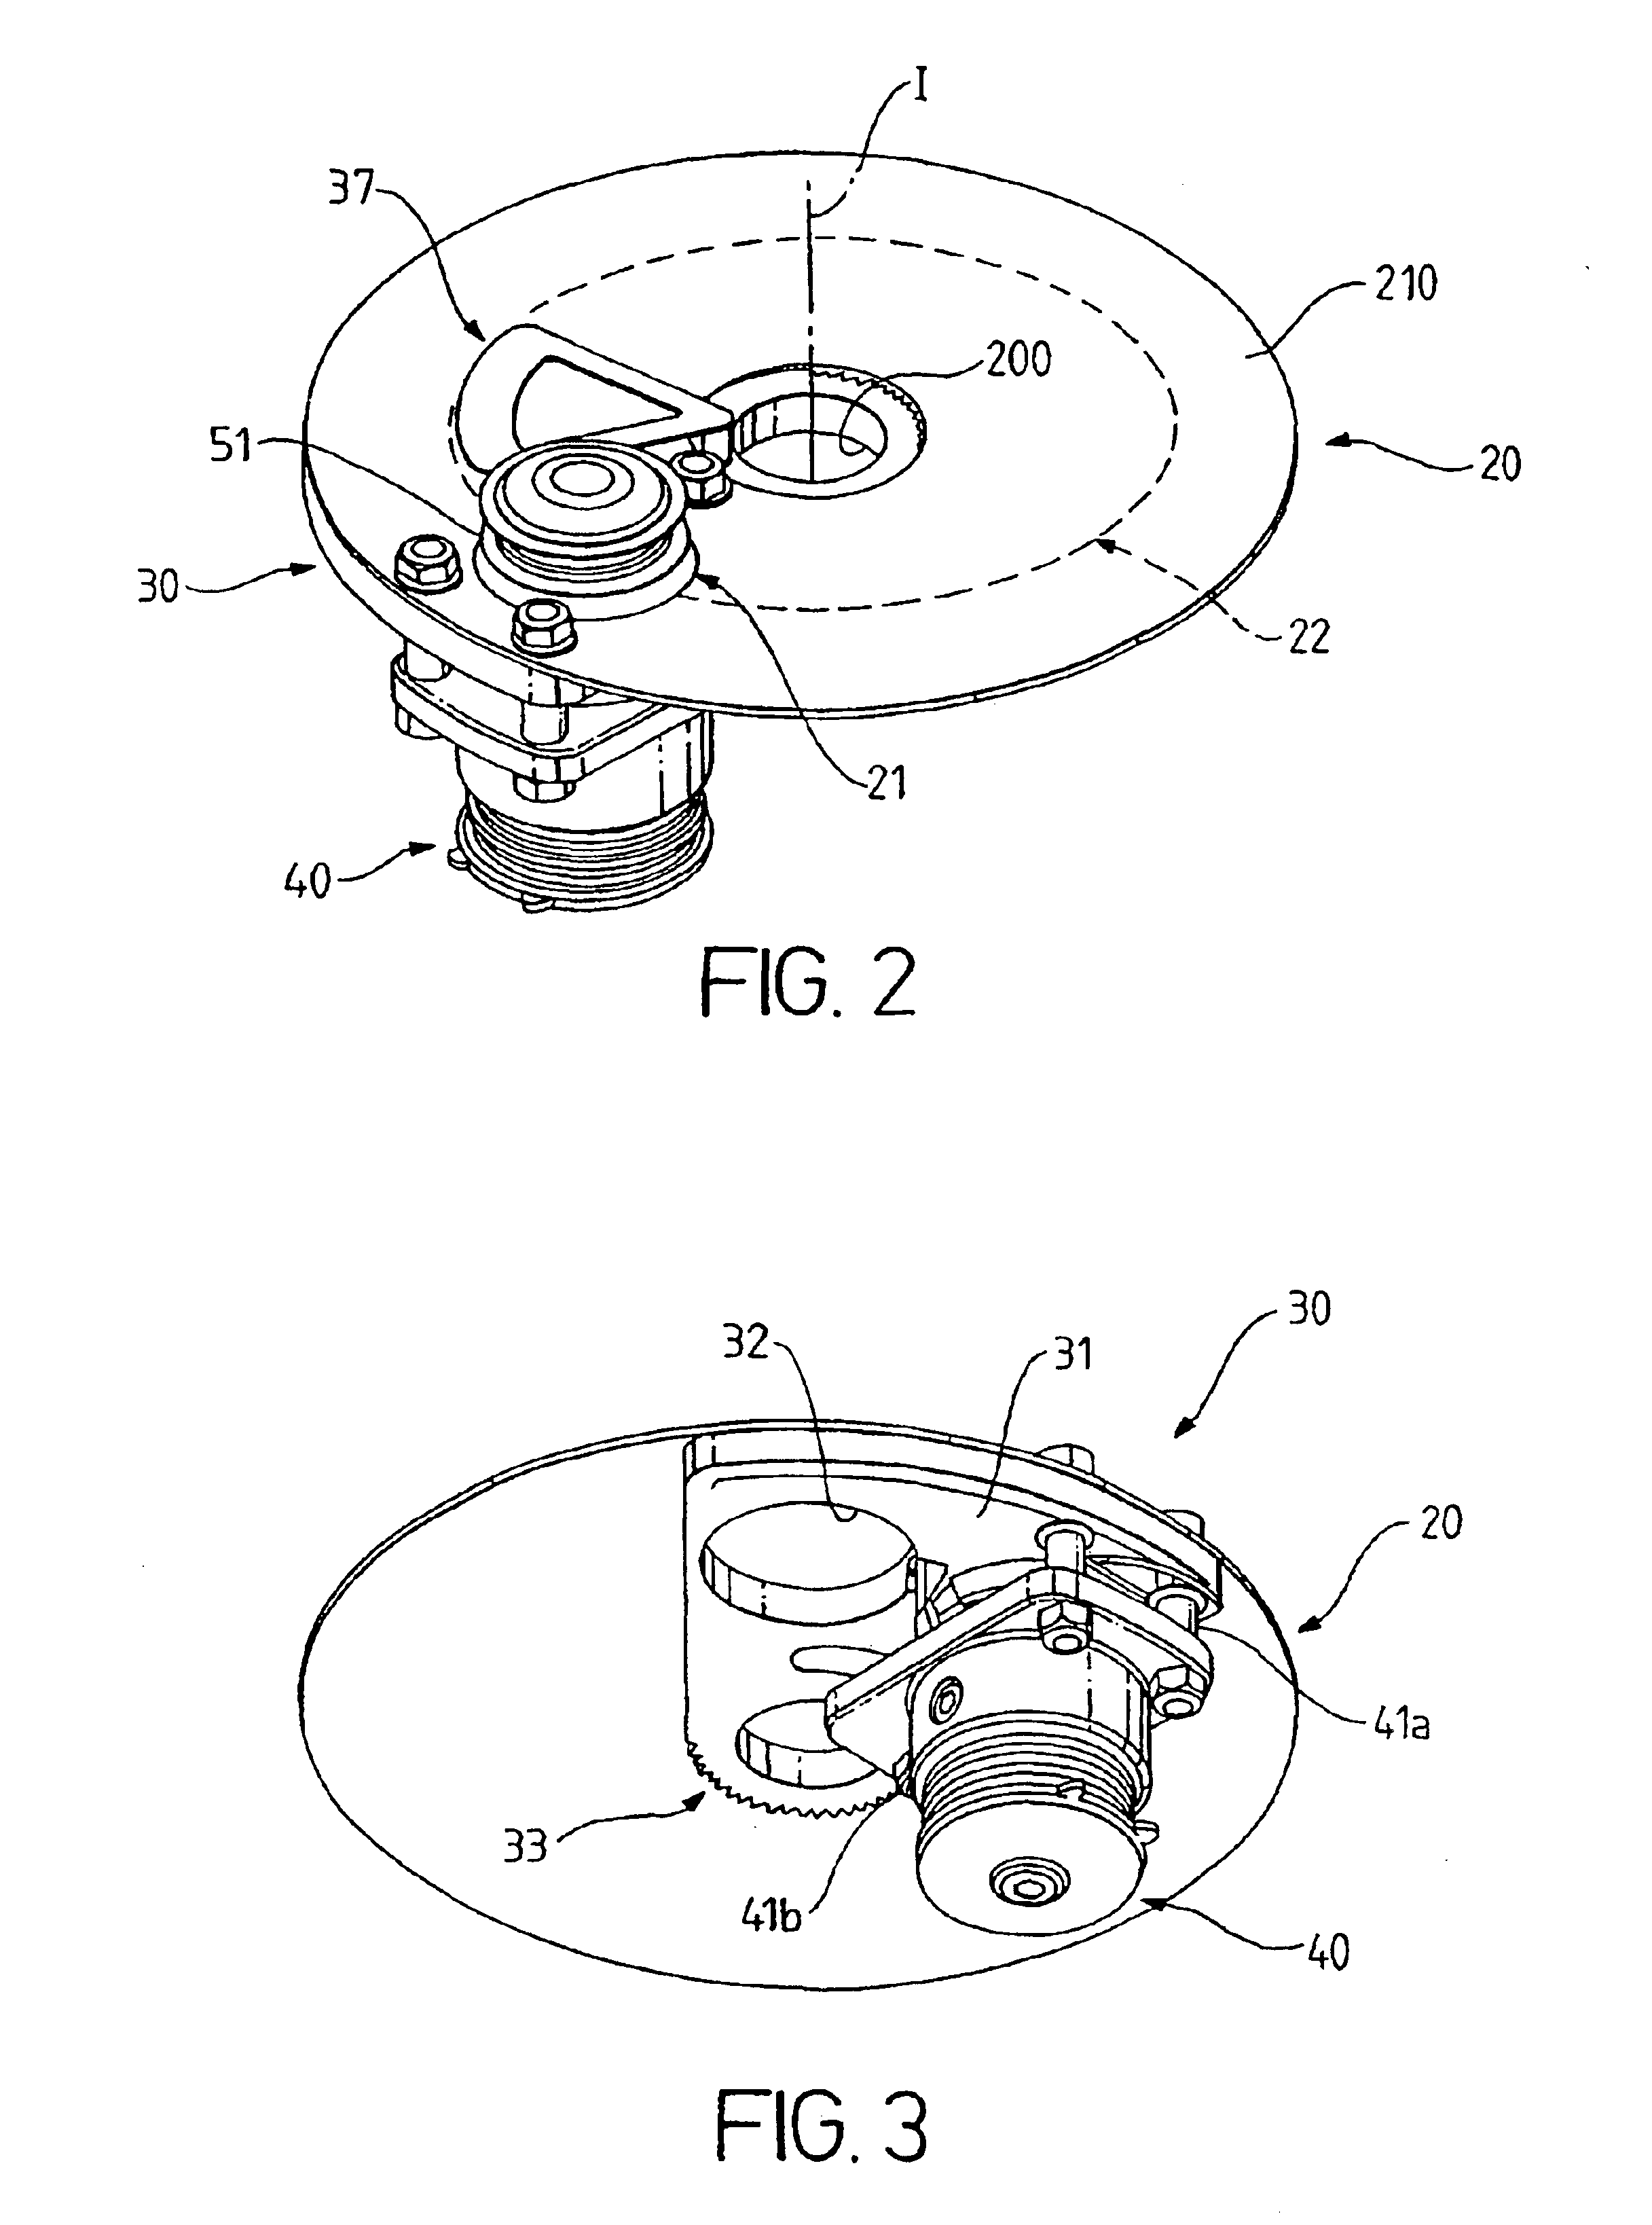 Extraction device with built-in capsule loading system